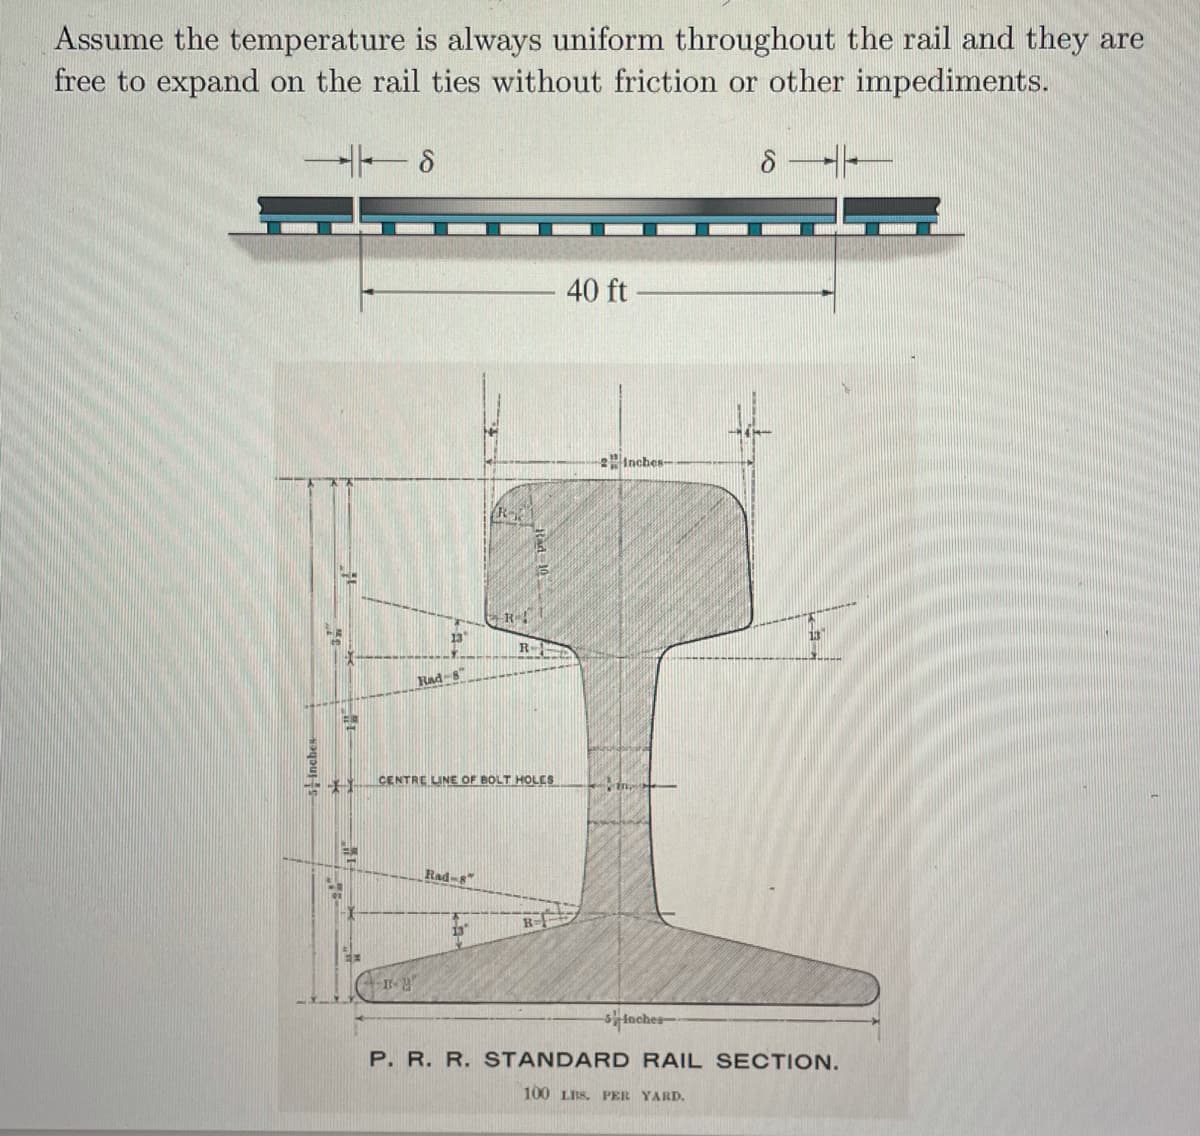 Assume the temperature is always uniform throughout the rail and they are
free to expand on the rail ties without friction or other impediments.
40 ft
Inches-
R
Rad-8"
CENTRE UNE OF BOLT HOLES
Rad-8"
laches-
P. R. R. STANDARD RAIL SECTION.
100 LBS, PER YARD.
Inches=
